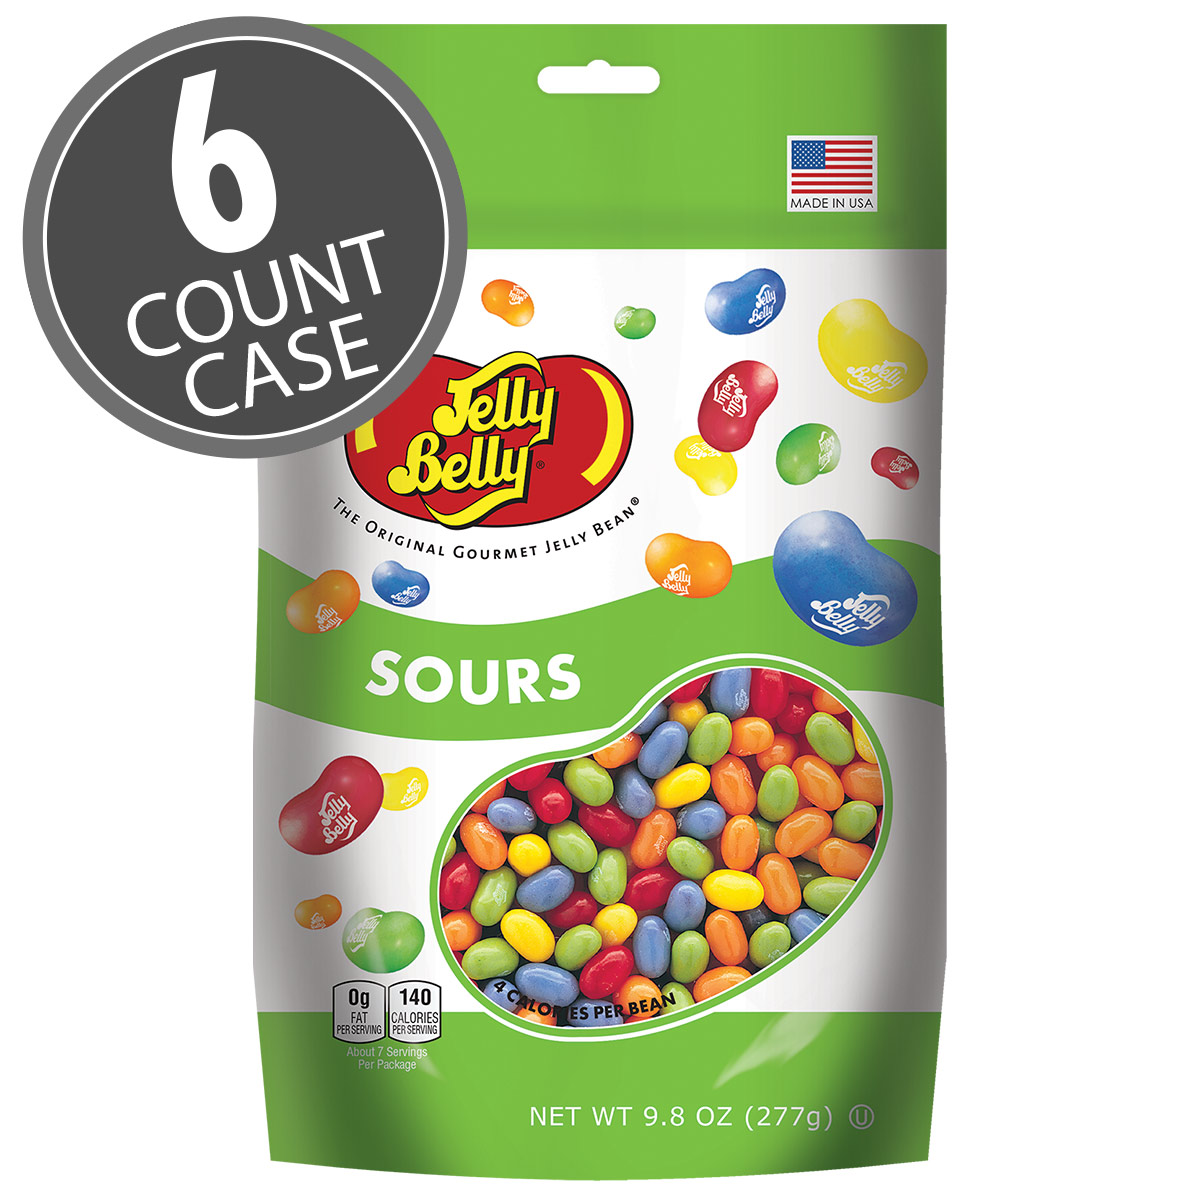 Jelly Belly Coupons, Promo Codes & Free Shipping | May 2017